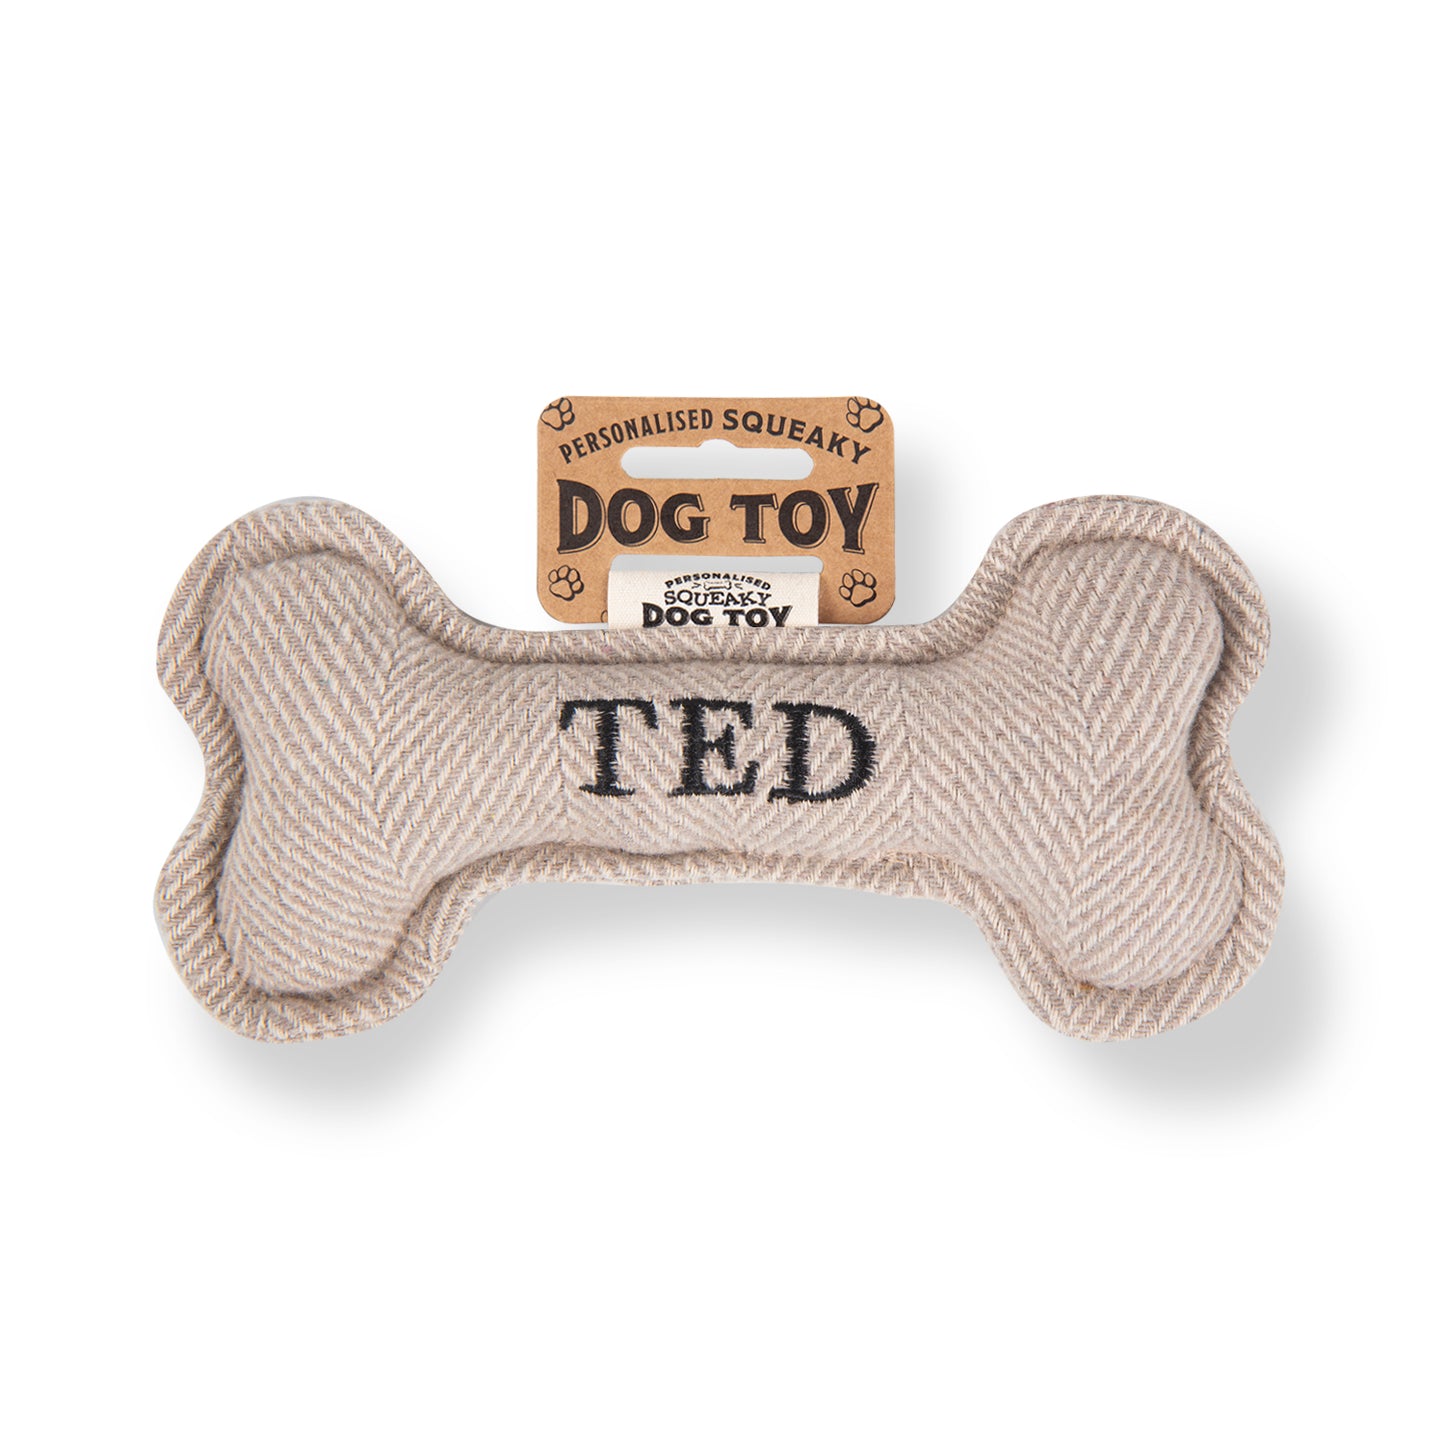 Squeaky Bone Dog Toy - Ted